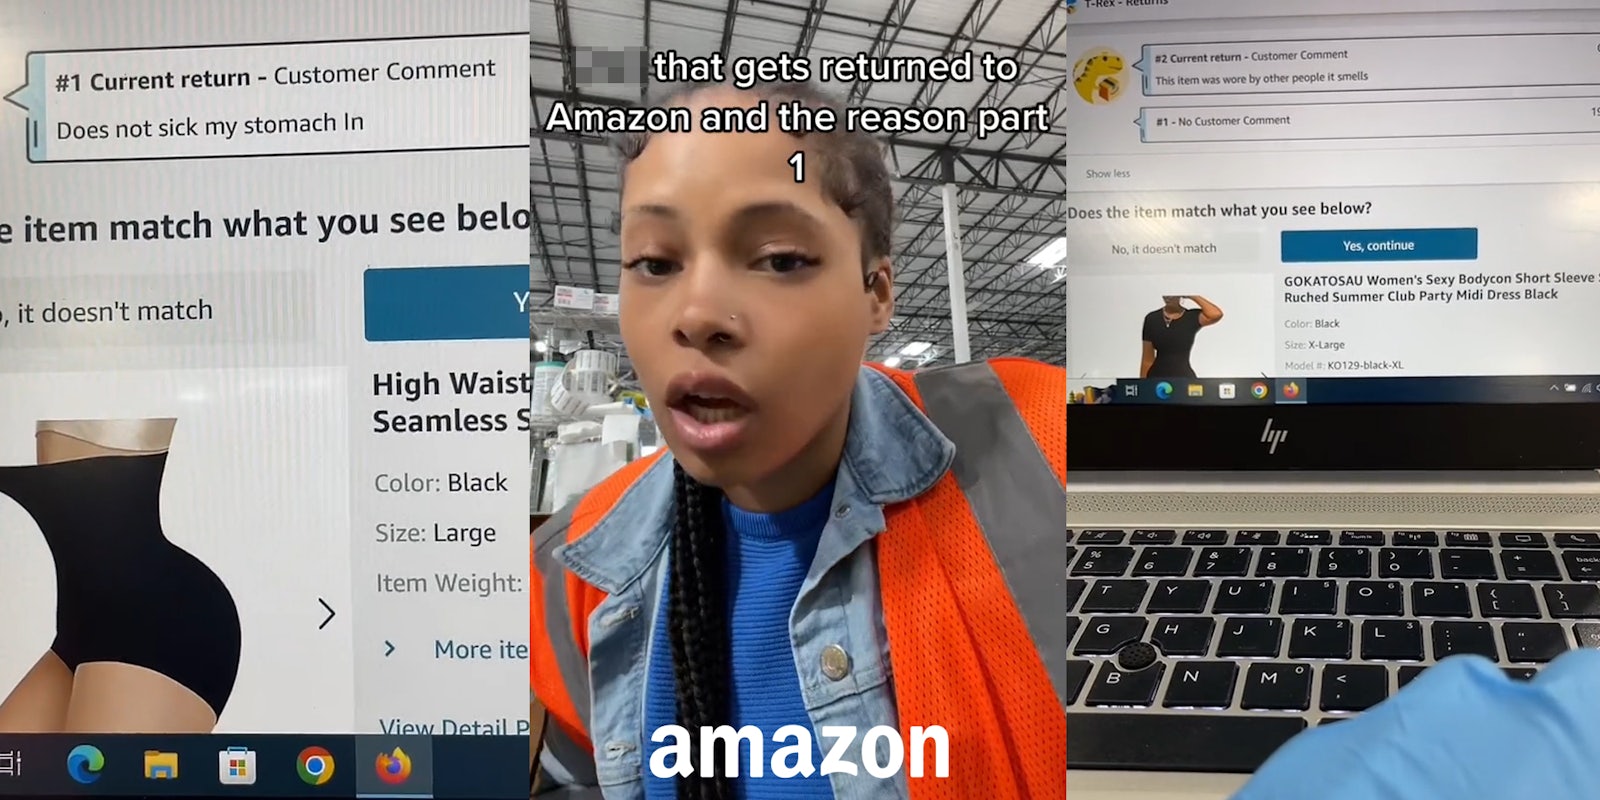 Amazon returns on laptop screen with comment 'Does not sick my stomach in' (l) Amazon employee speaking with caption 'blank that gets returned to Amazon and the reason part 1' with Amazon logo at bottom (c) Amazon worker using laptop with Amazon returns on screen (r)